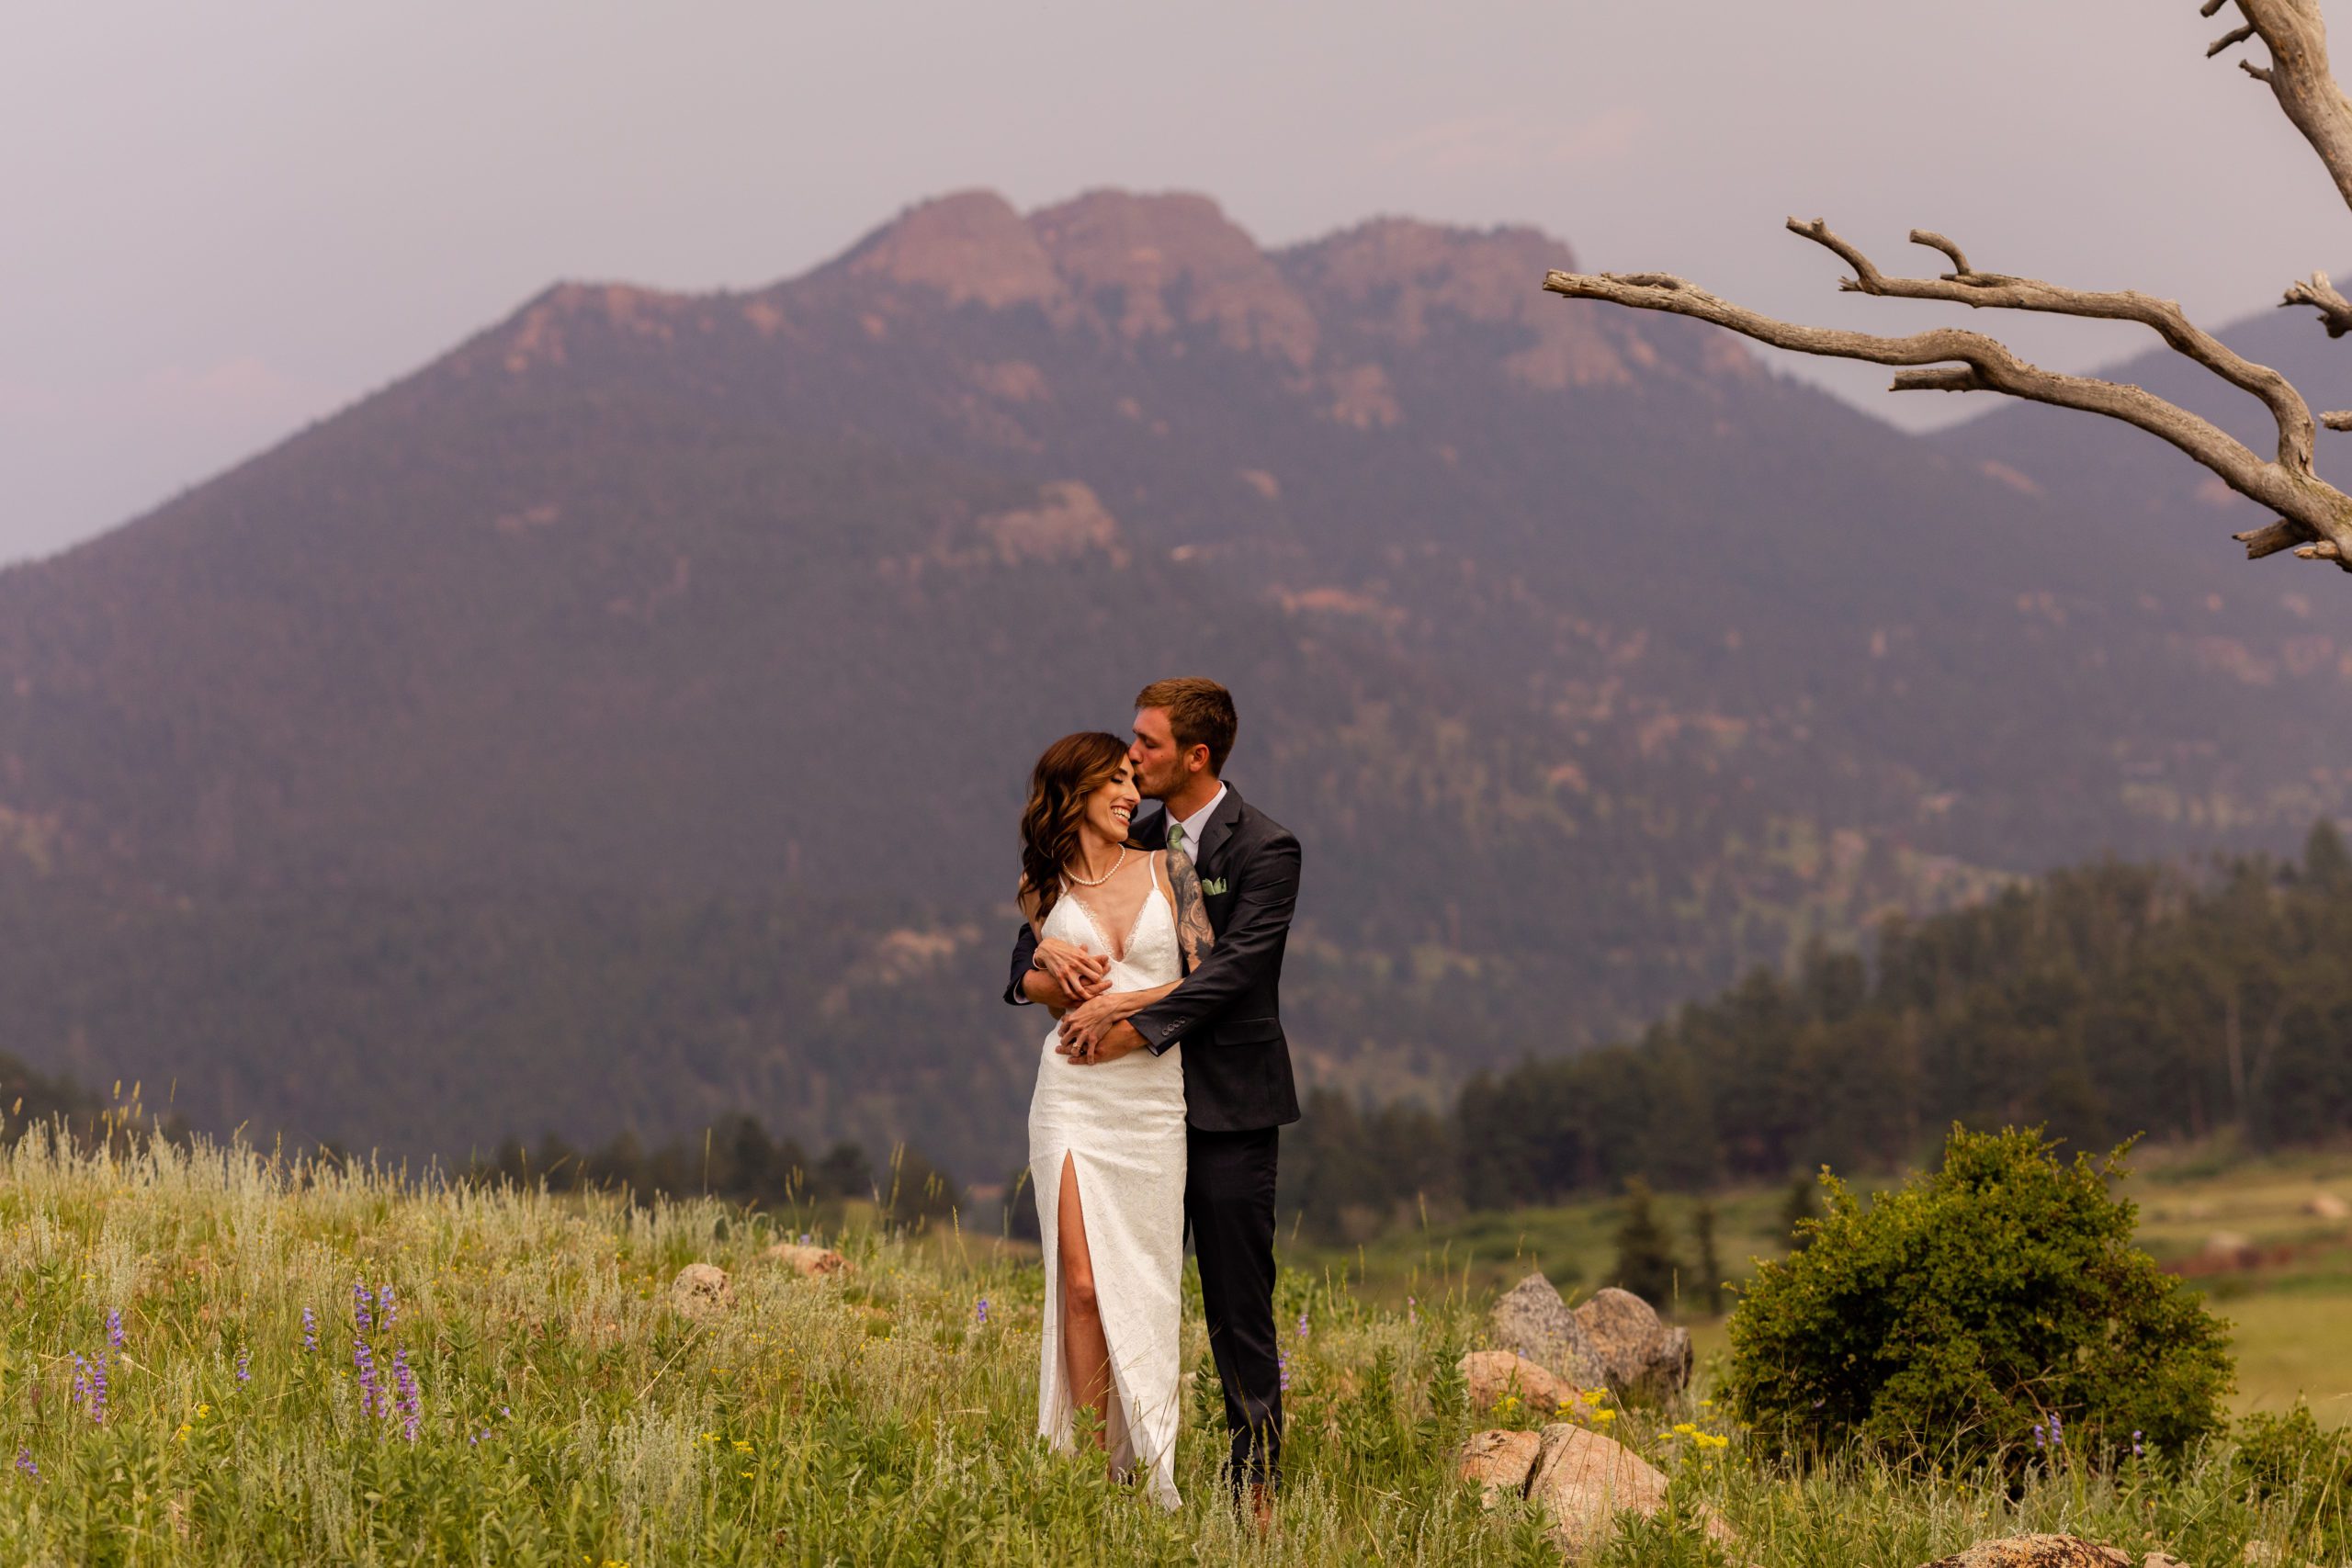 Bride and groom eloped to Rocky Mountain National Park in Colorado with the Moraine Mountain Range as their backdrop